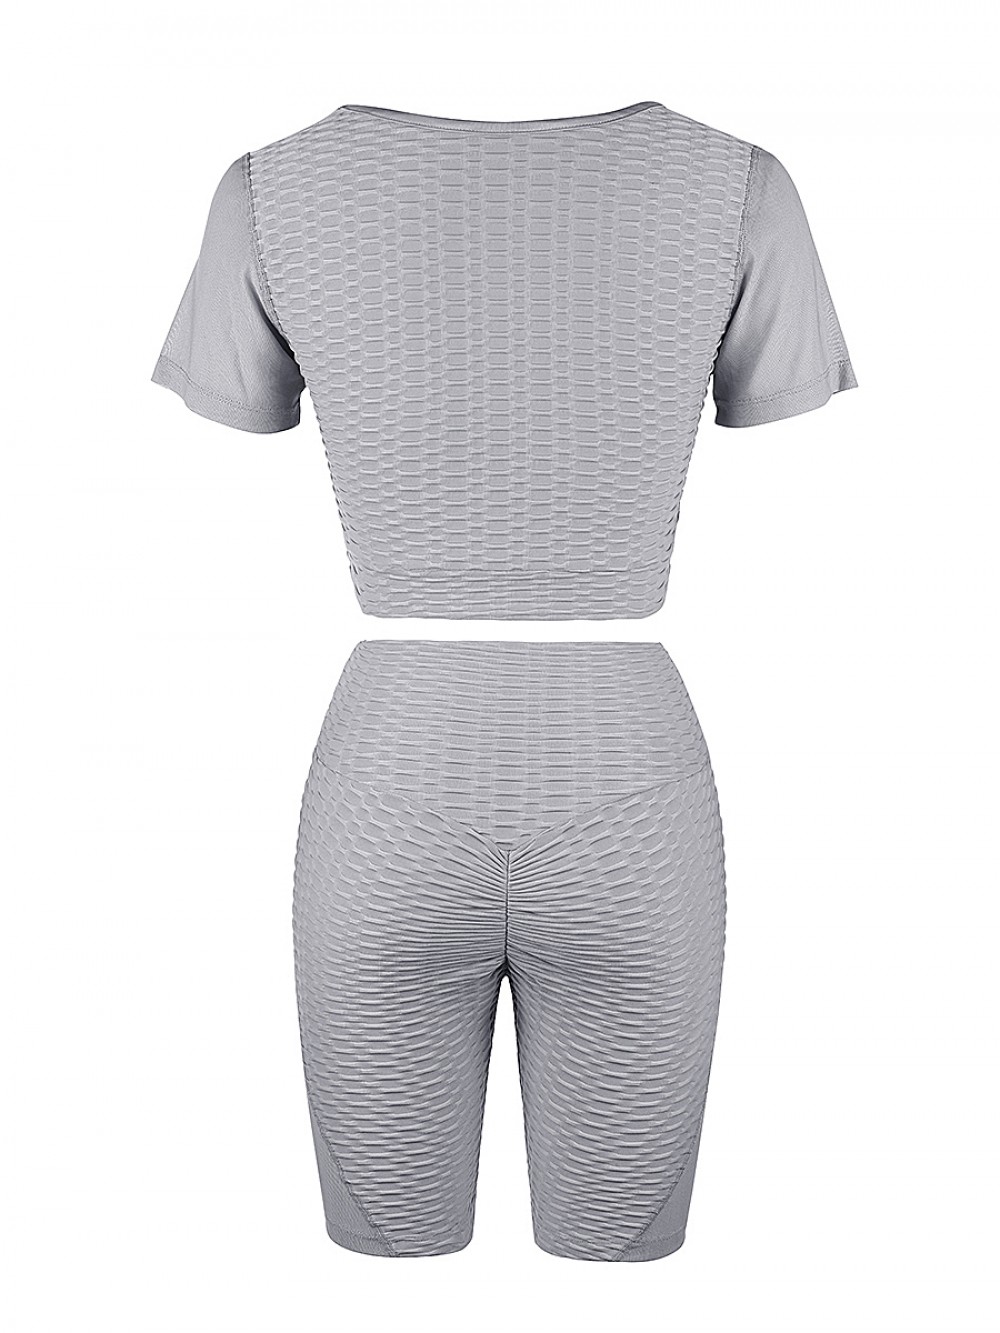 Gymnastic Gray Sports Suit Short Sleeve High Rise Absorption